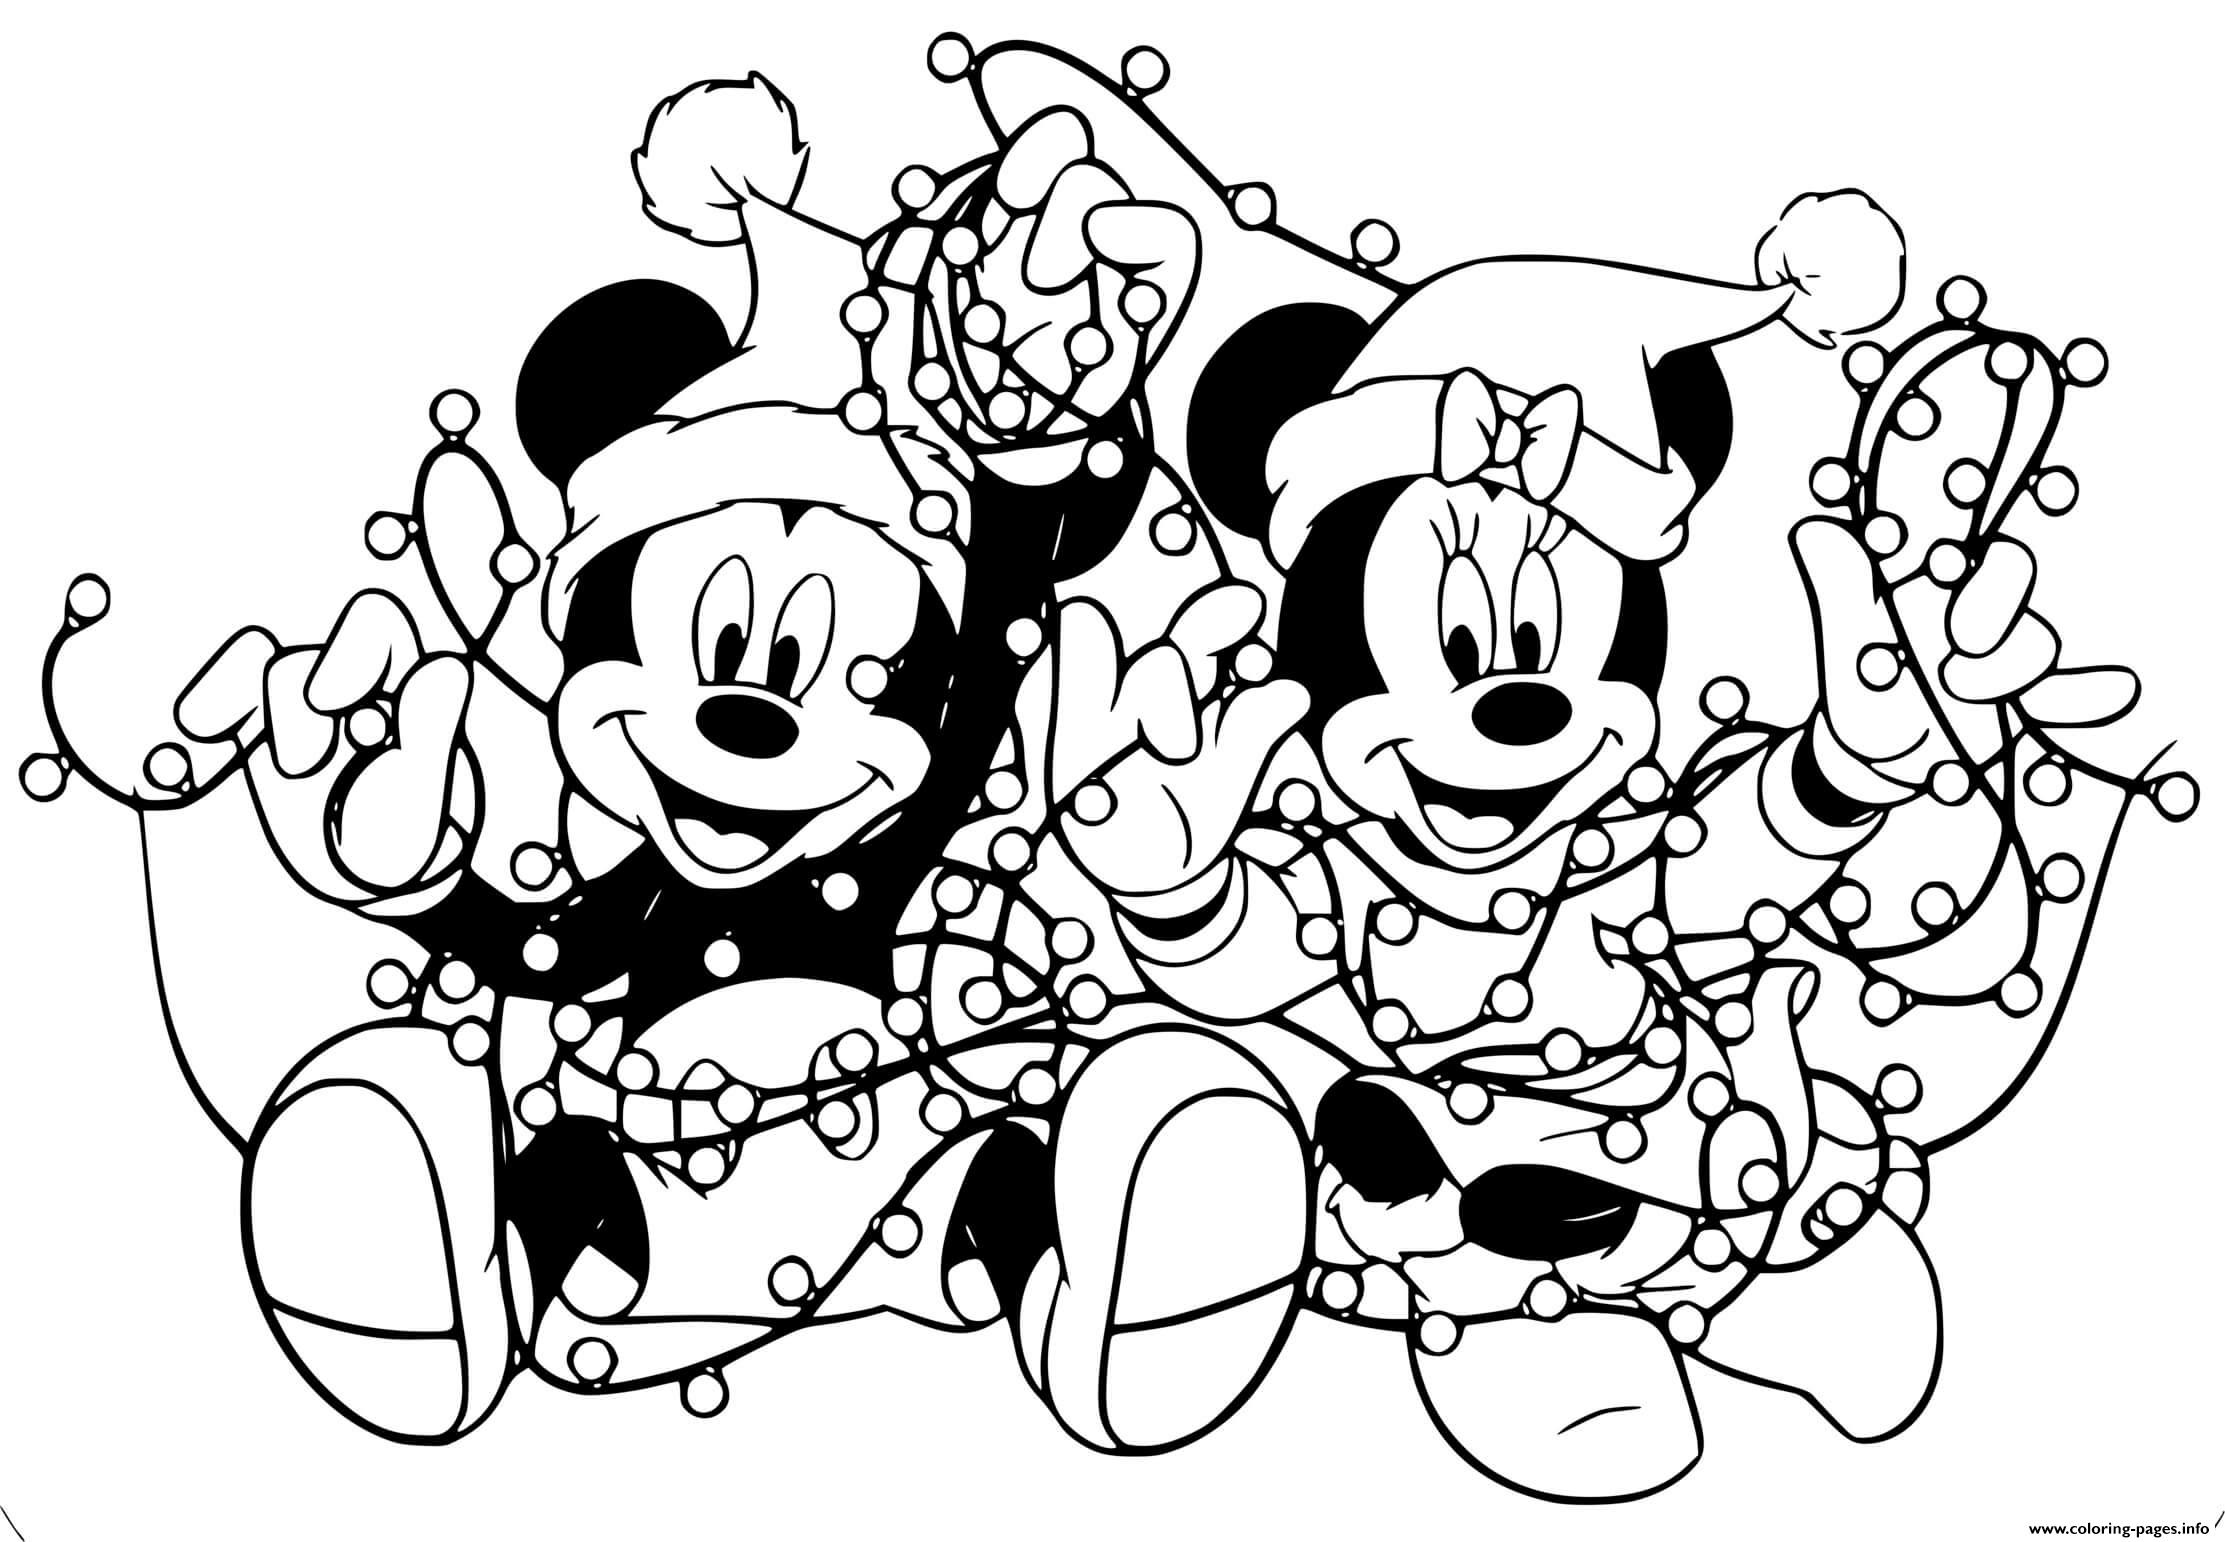 Mickey Minnie Tangled In Lights coloring